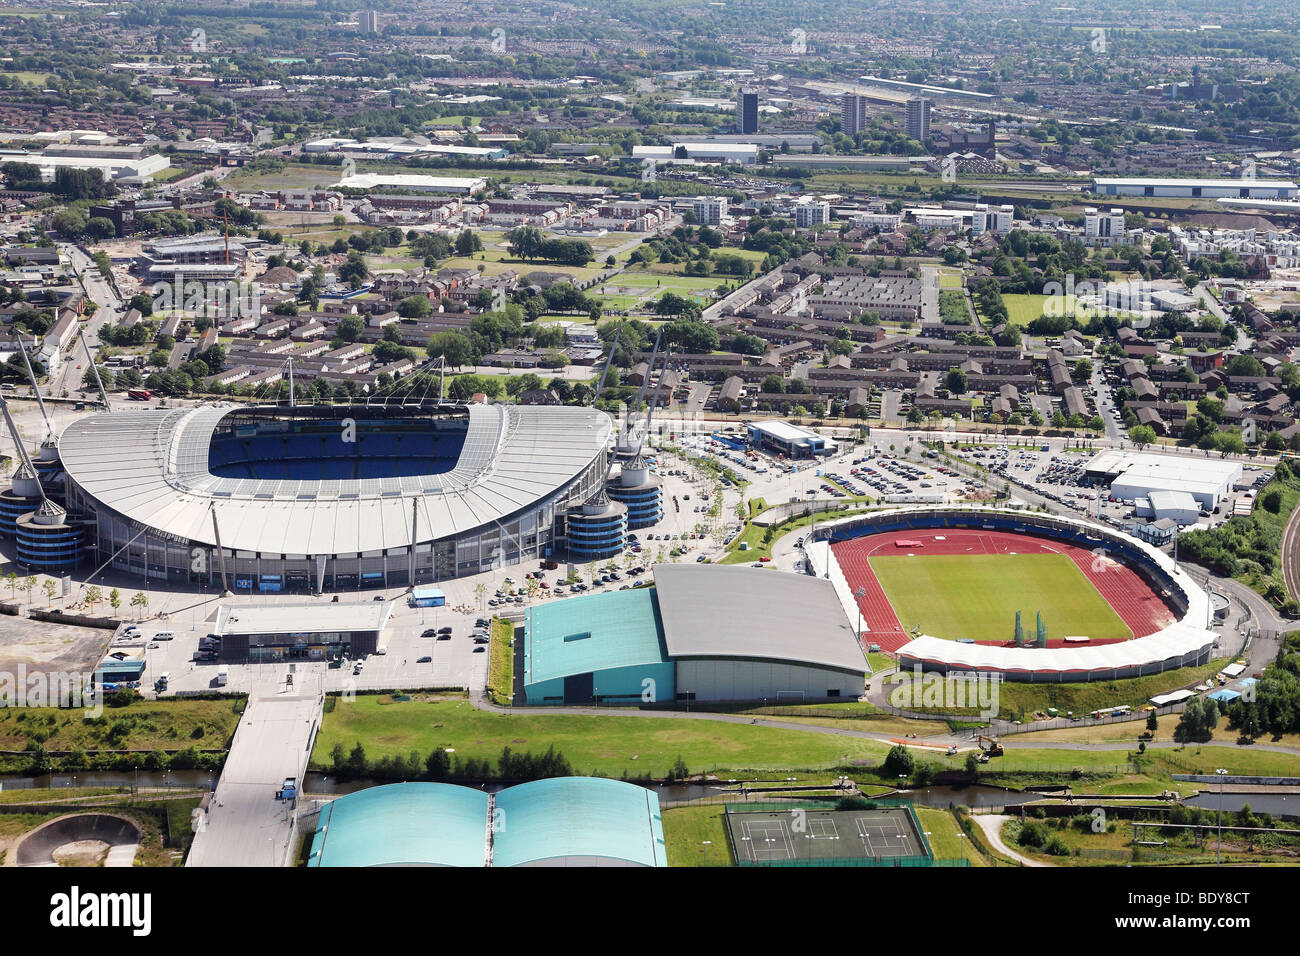 City of Manchester Stadium from the air. Stock Photo